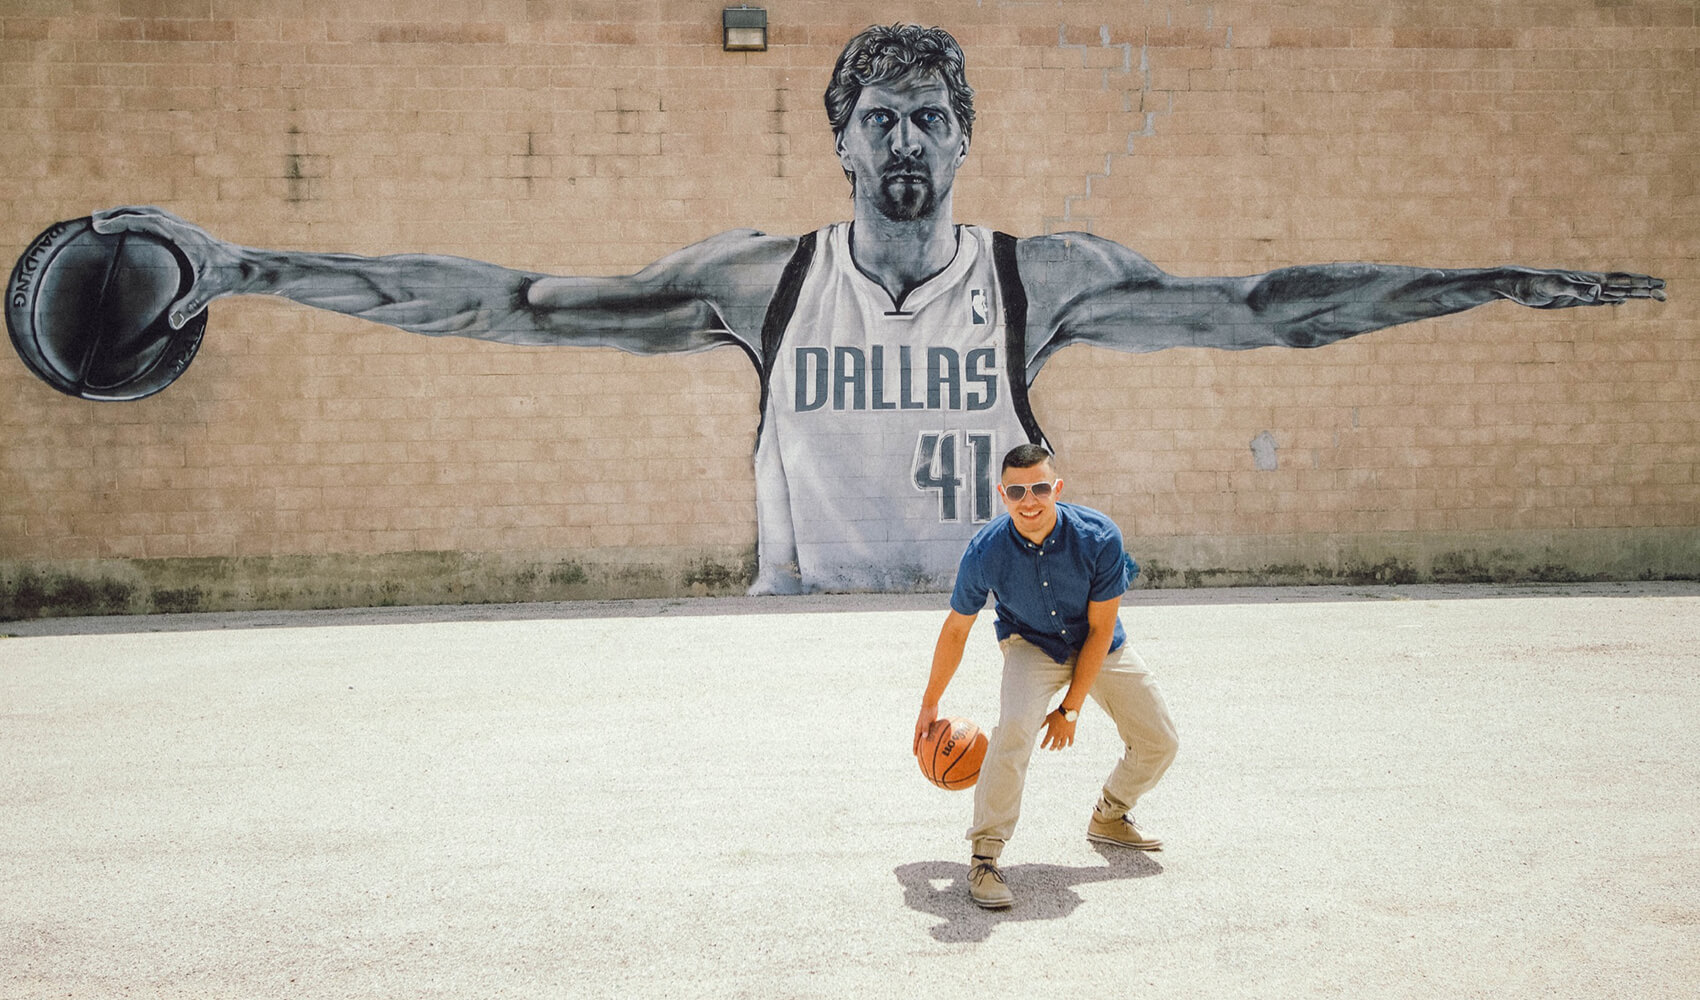 Kevin dribbling a basketball with Dirk